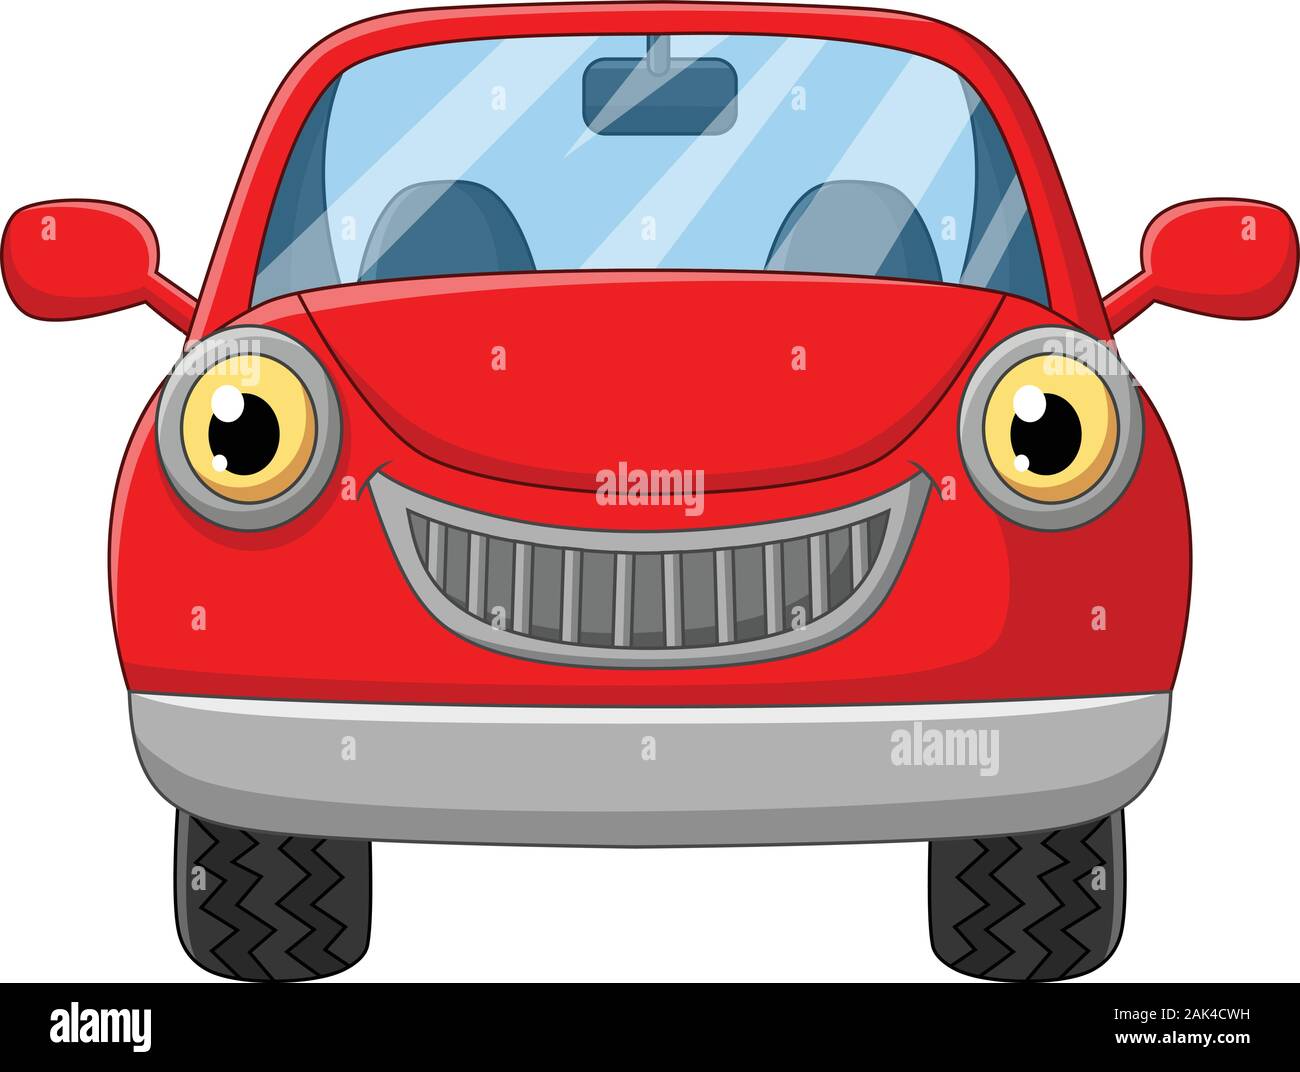 Car headlights on Stock Vector Images - Page 2 - Alamy